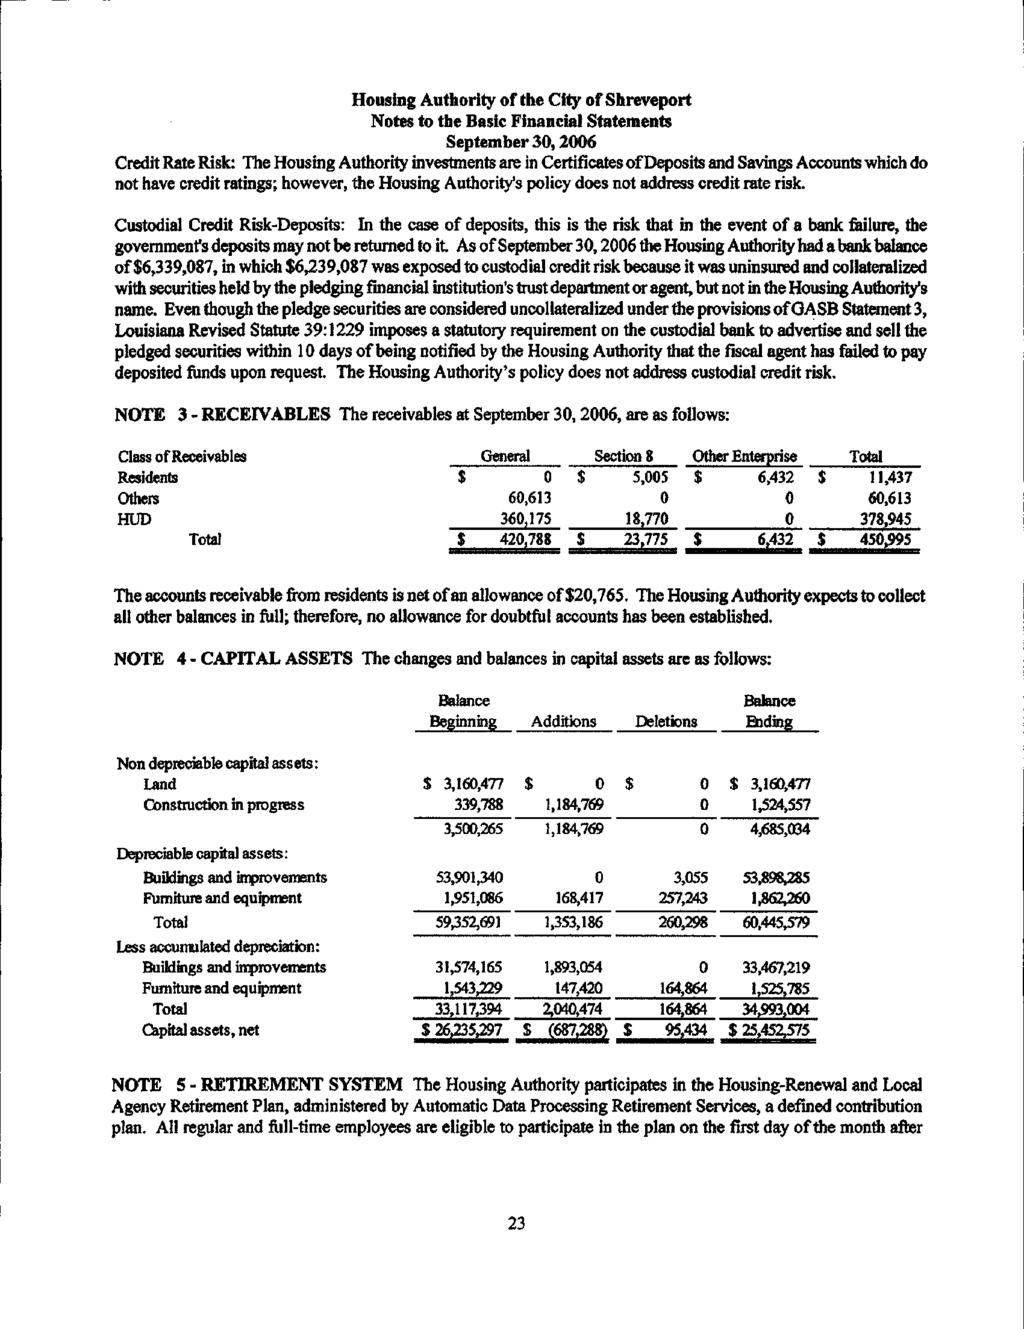 Housing Authority of the City of Shreveport Notes to the Basic Financial Statements September 3,26 Credit Rate Risk: The Housing Authority investments are in Certificates of Deposits and Savings